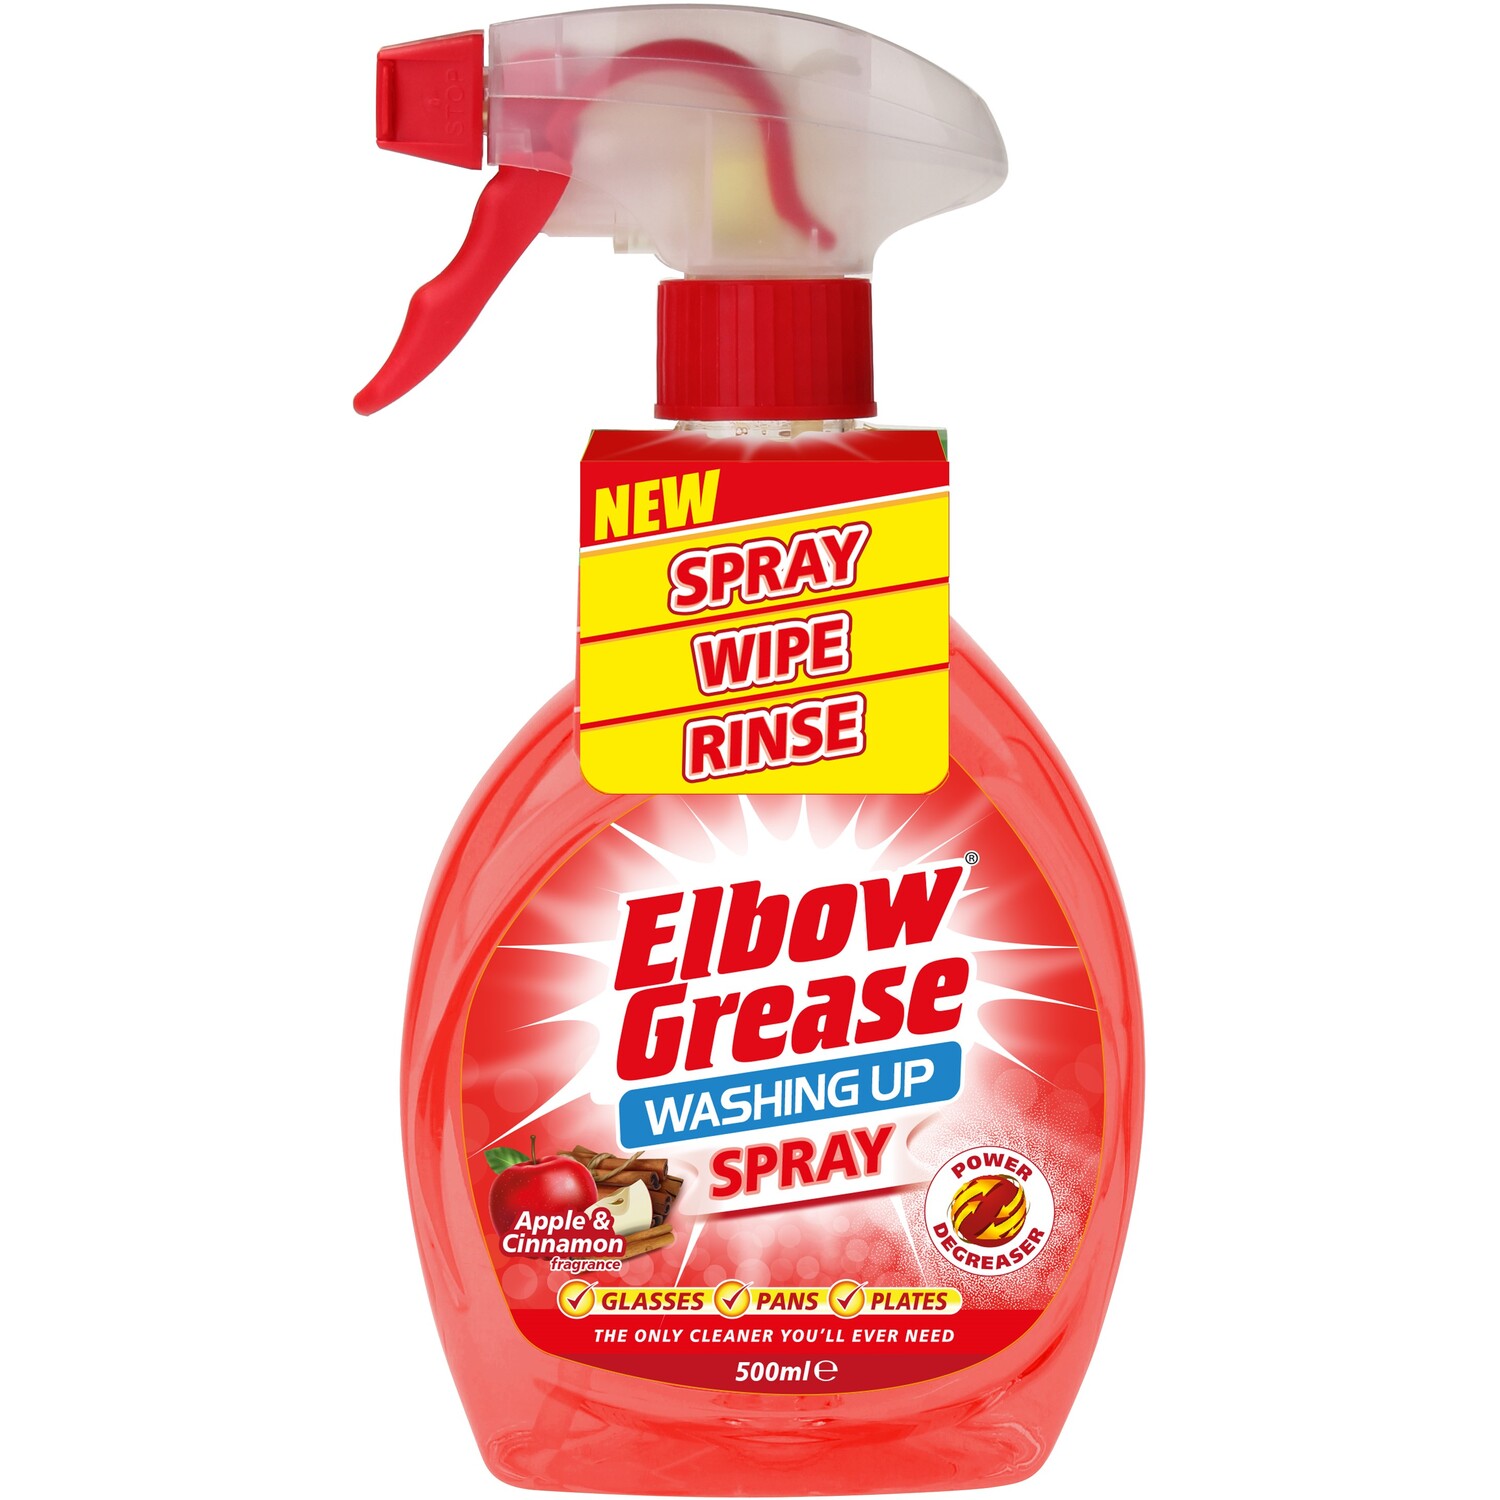 Elbow Grease Washing Up Spray - Apple and Cinnamon Image